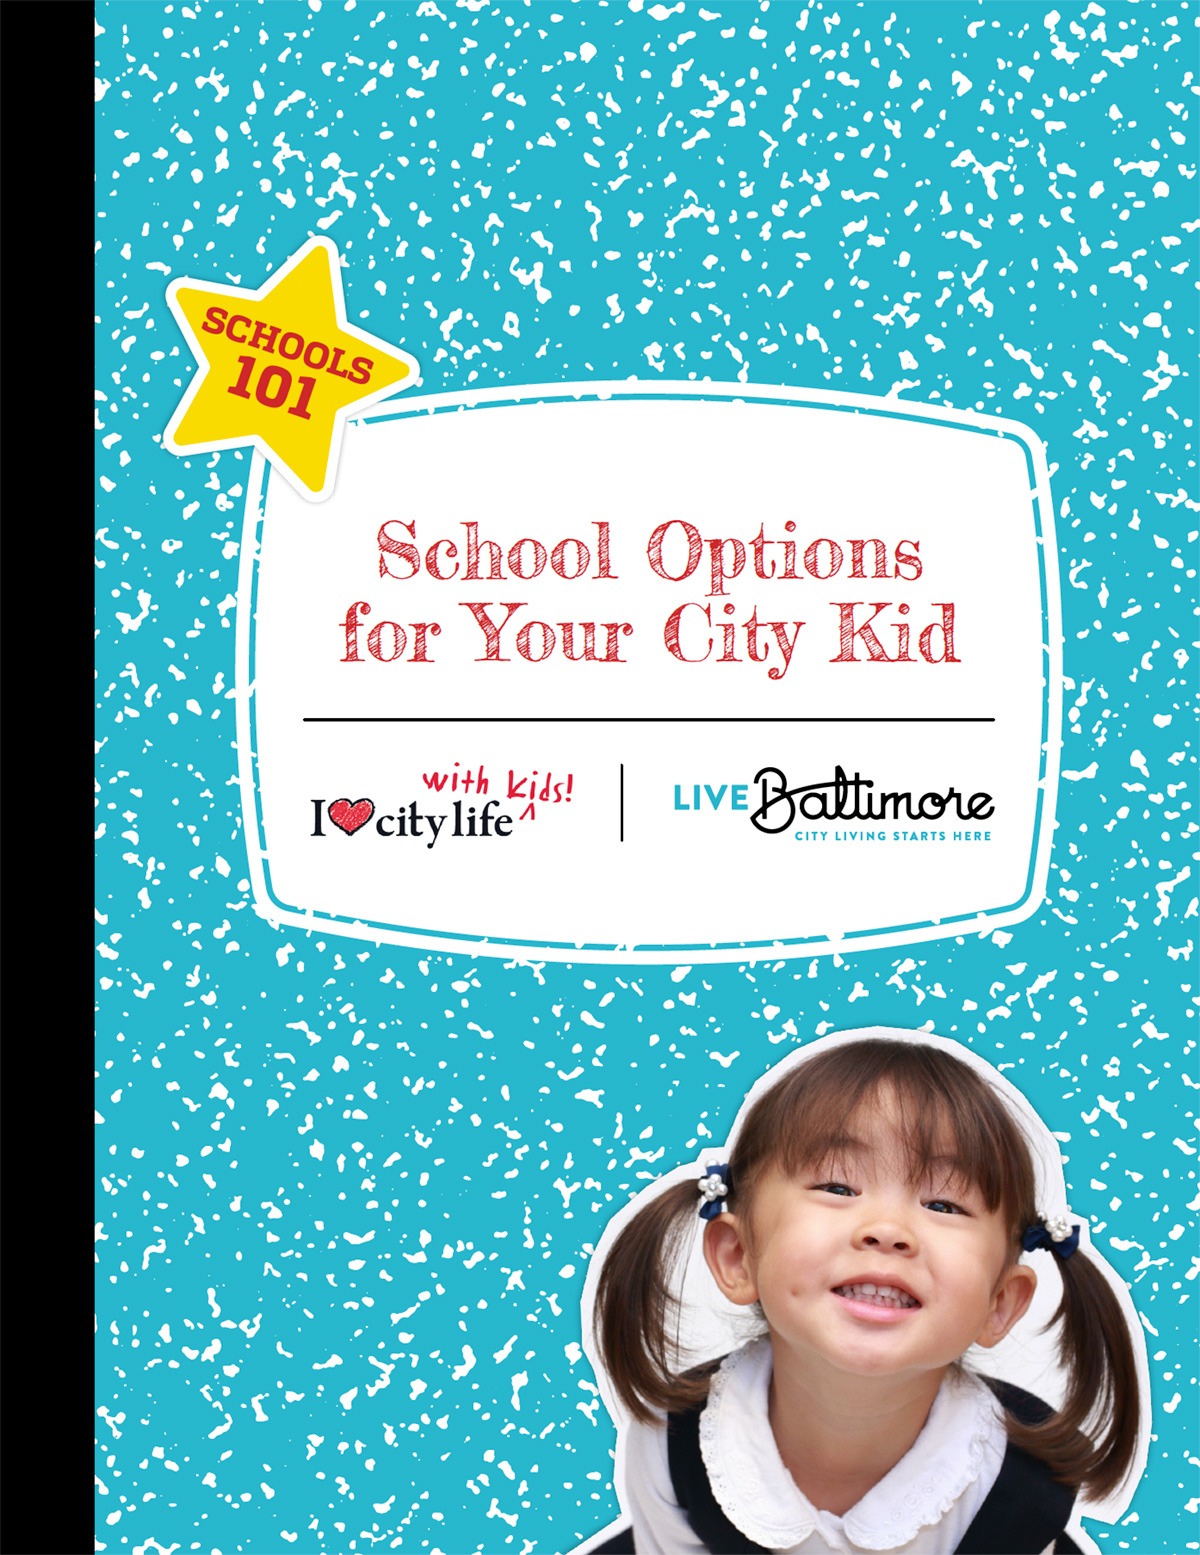 Download the School Options for Your City Kid Guide in PDF format here